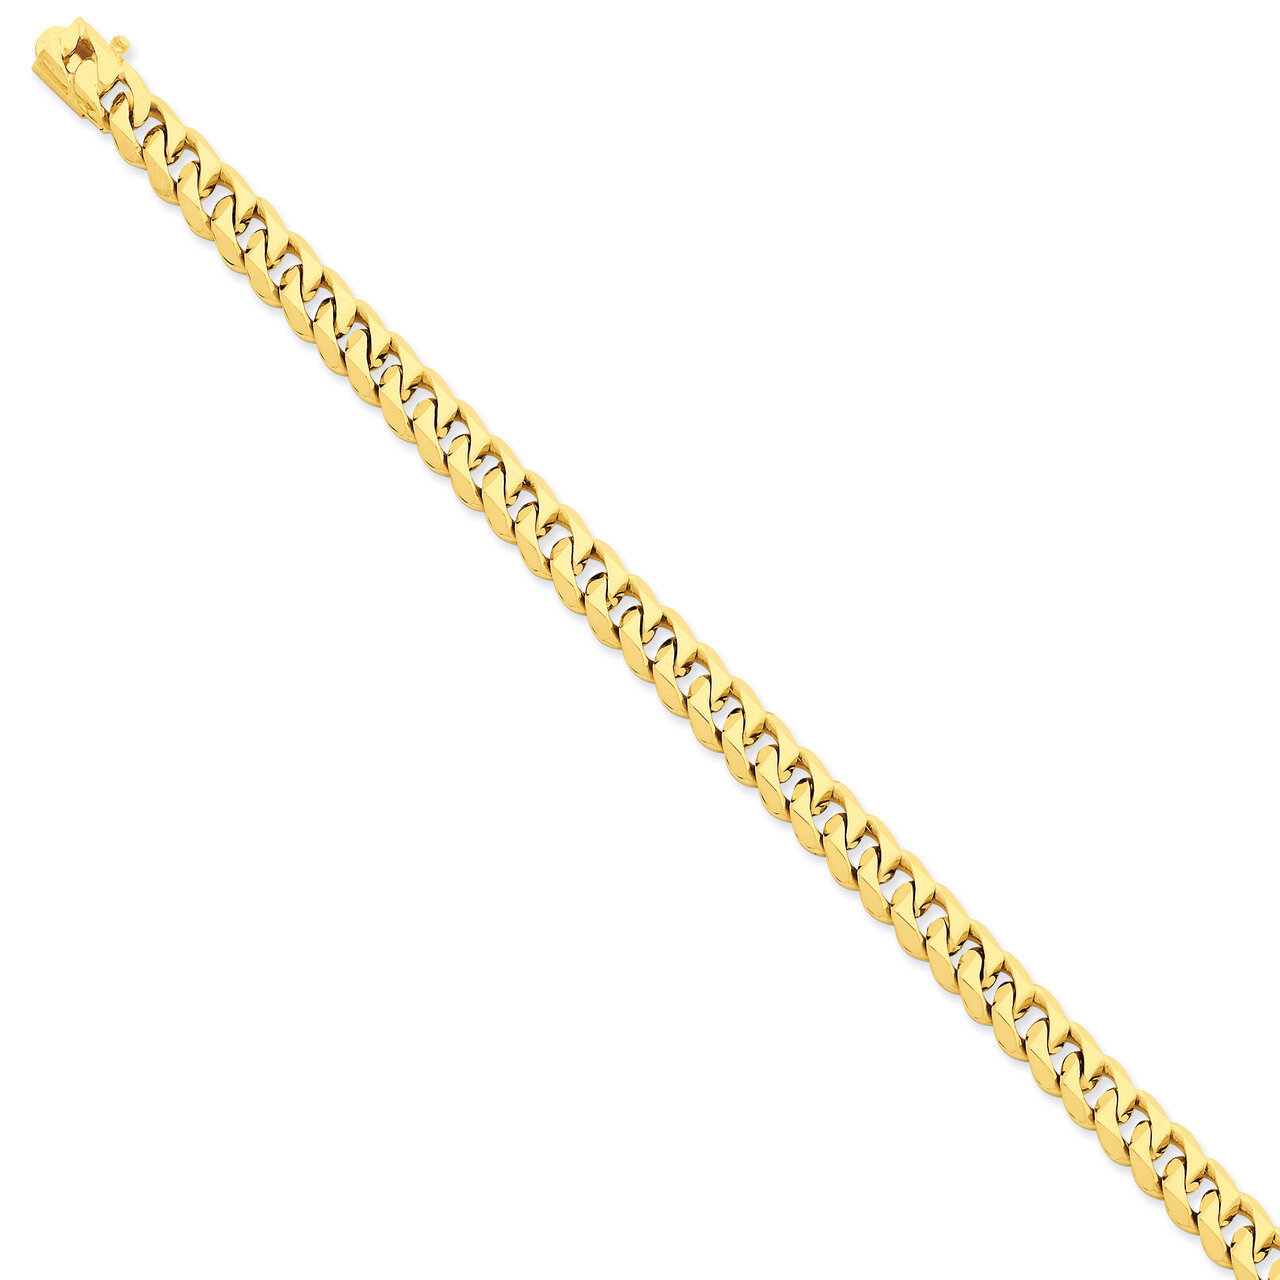 7mm Hand-Polished Traditional Link Chain 9 Inch 14k Gold LK117-9